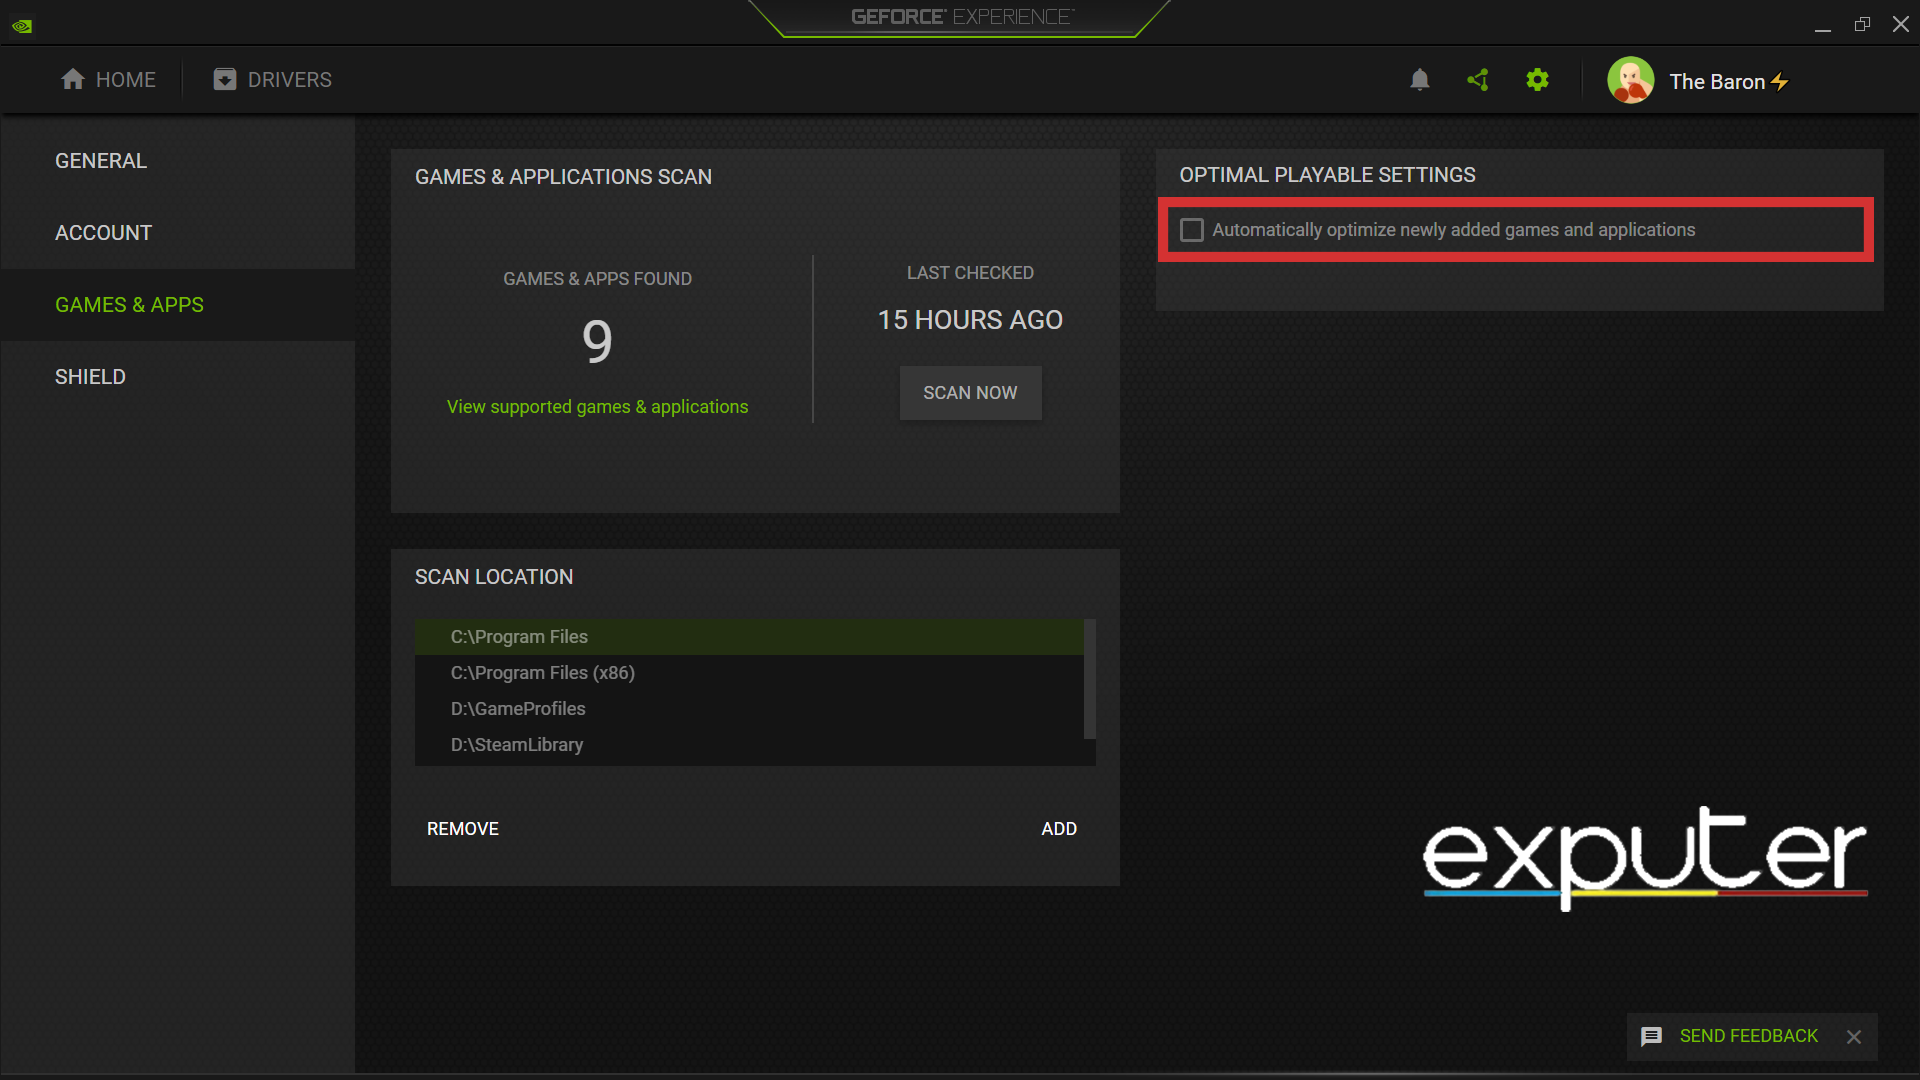 Turned off the Automatically Optimize newly added games and applications option in Nvidia GeForce Experience. (image copyrighted by eXputer)